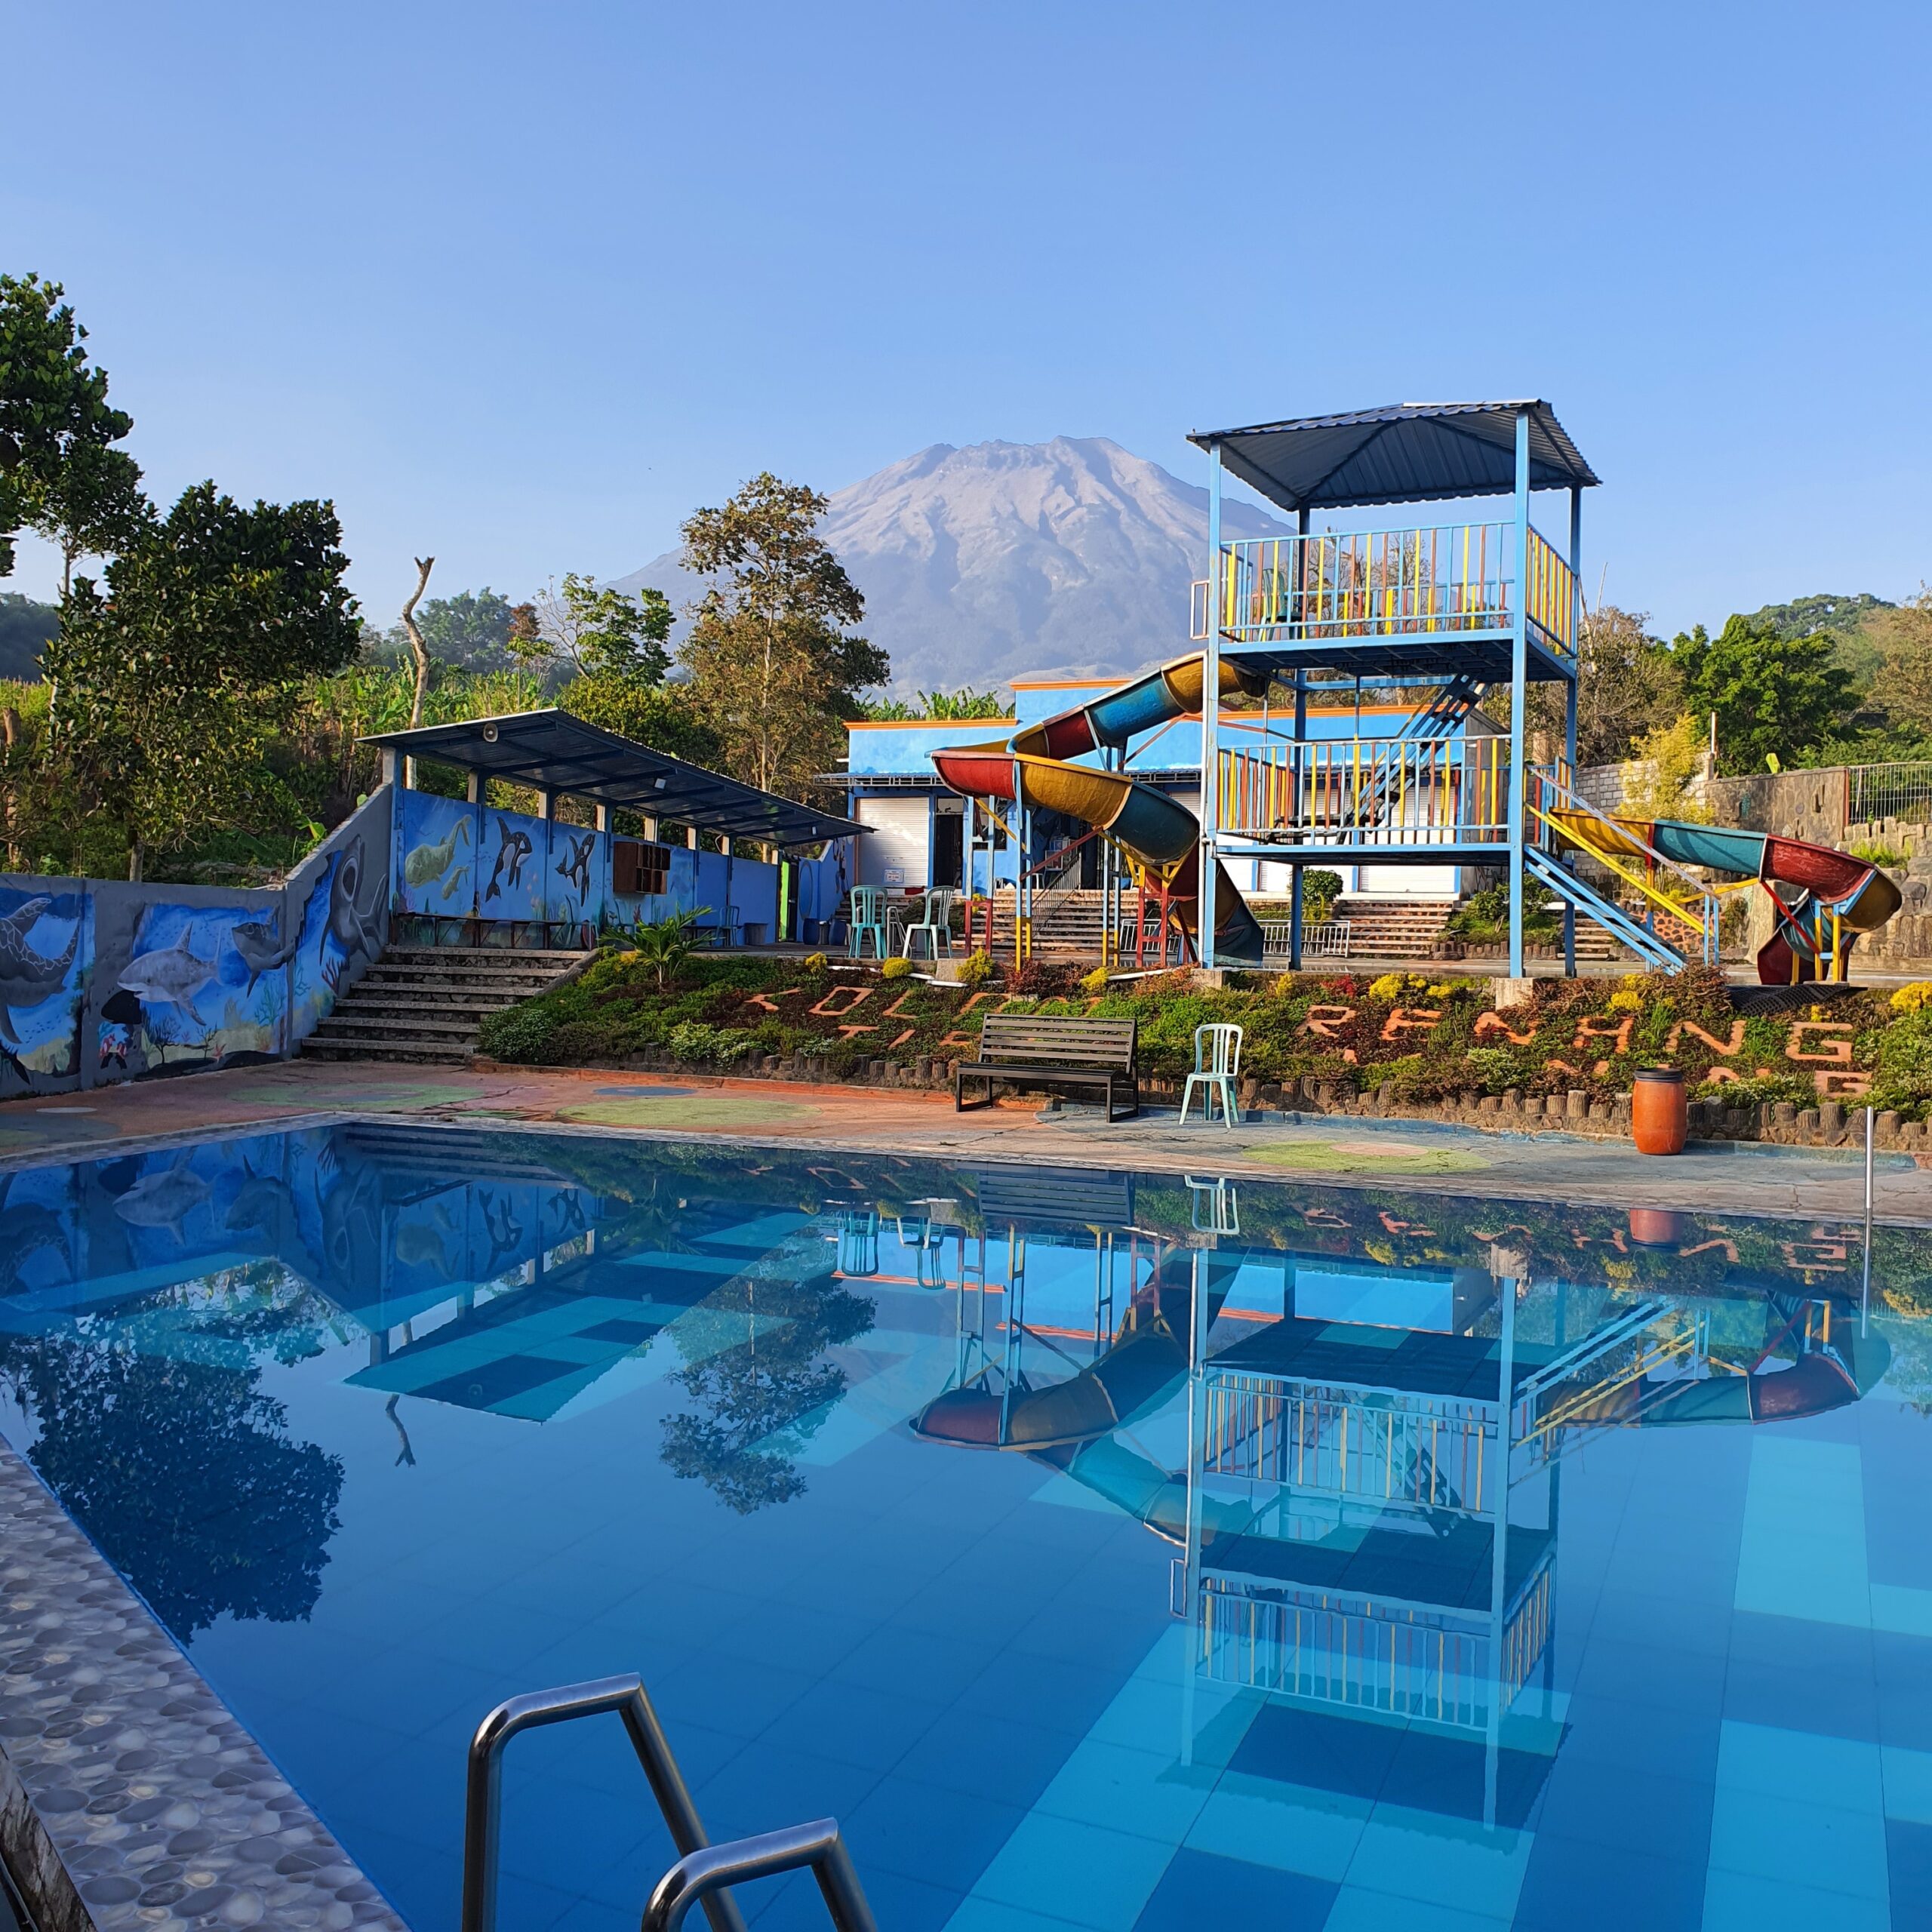 a large blue swimming pool with a slide in the background